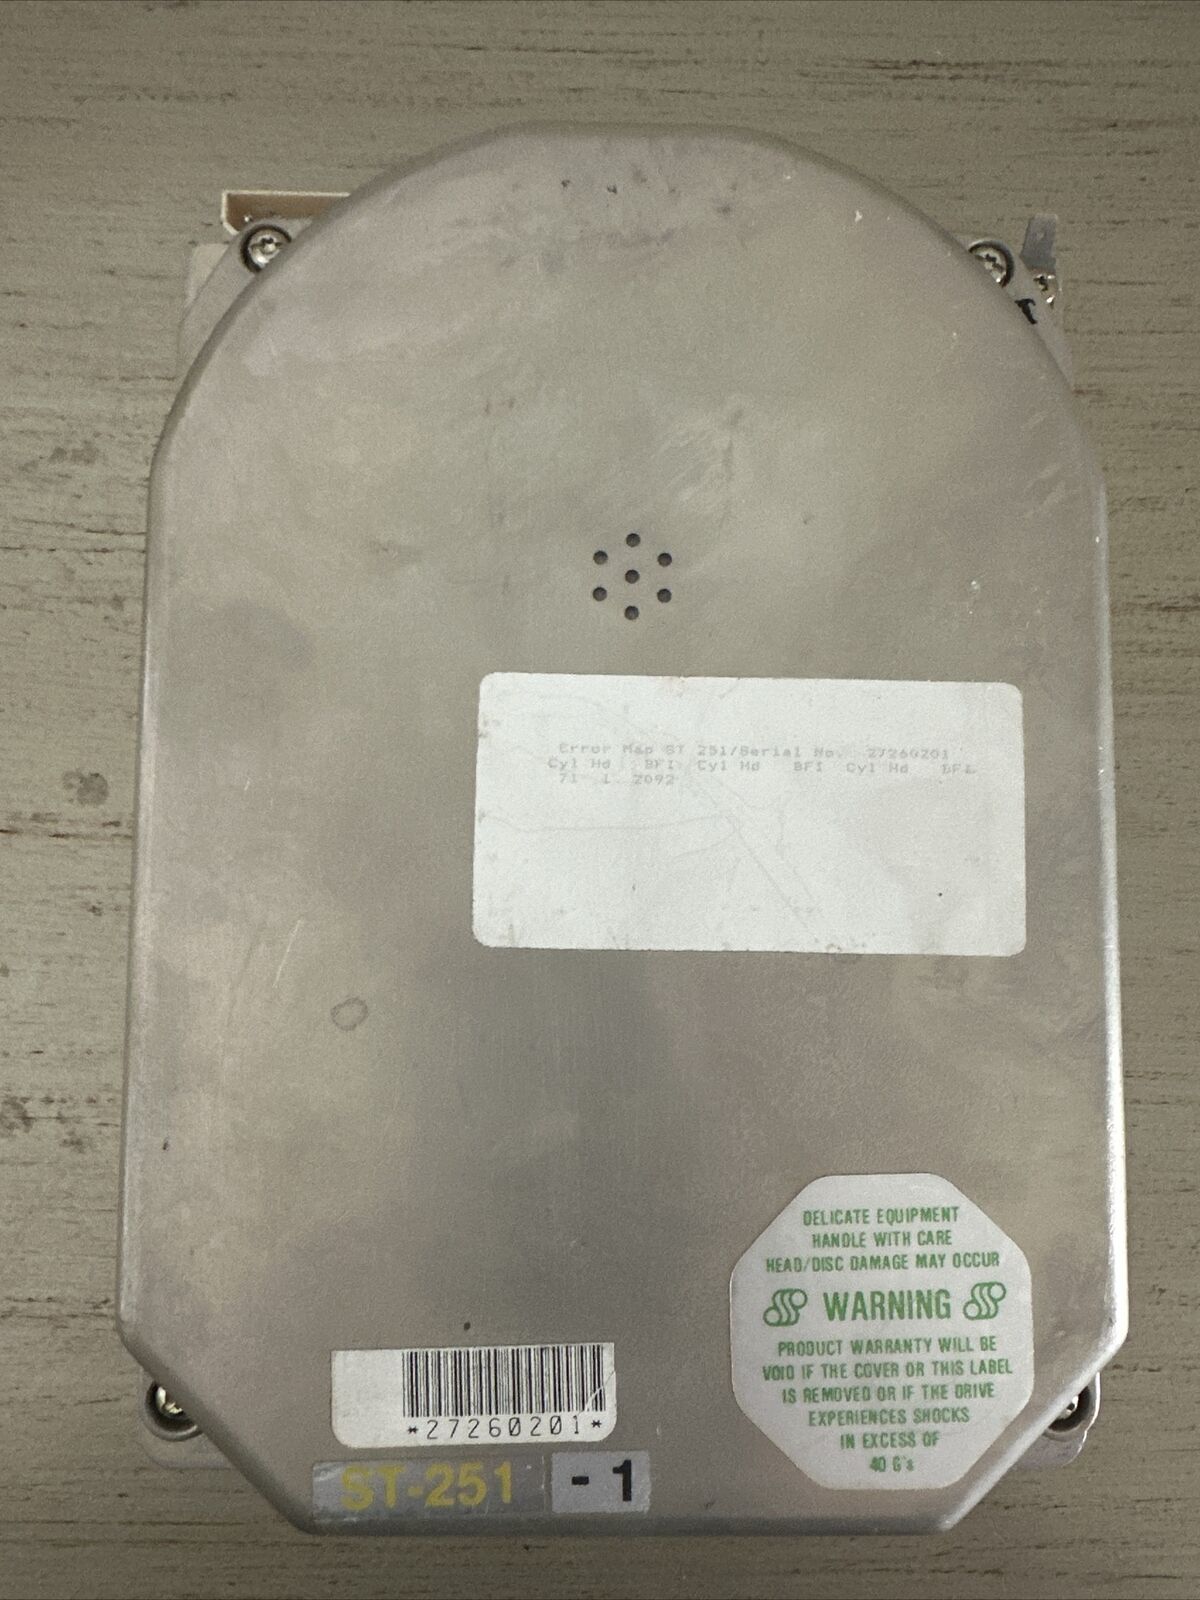  Vintage Seagate  ST251-1 5.25IN Hard Drive Used Untested